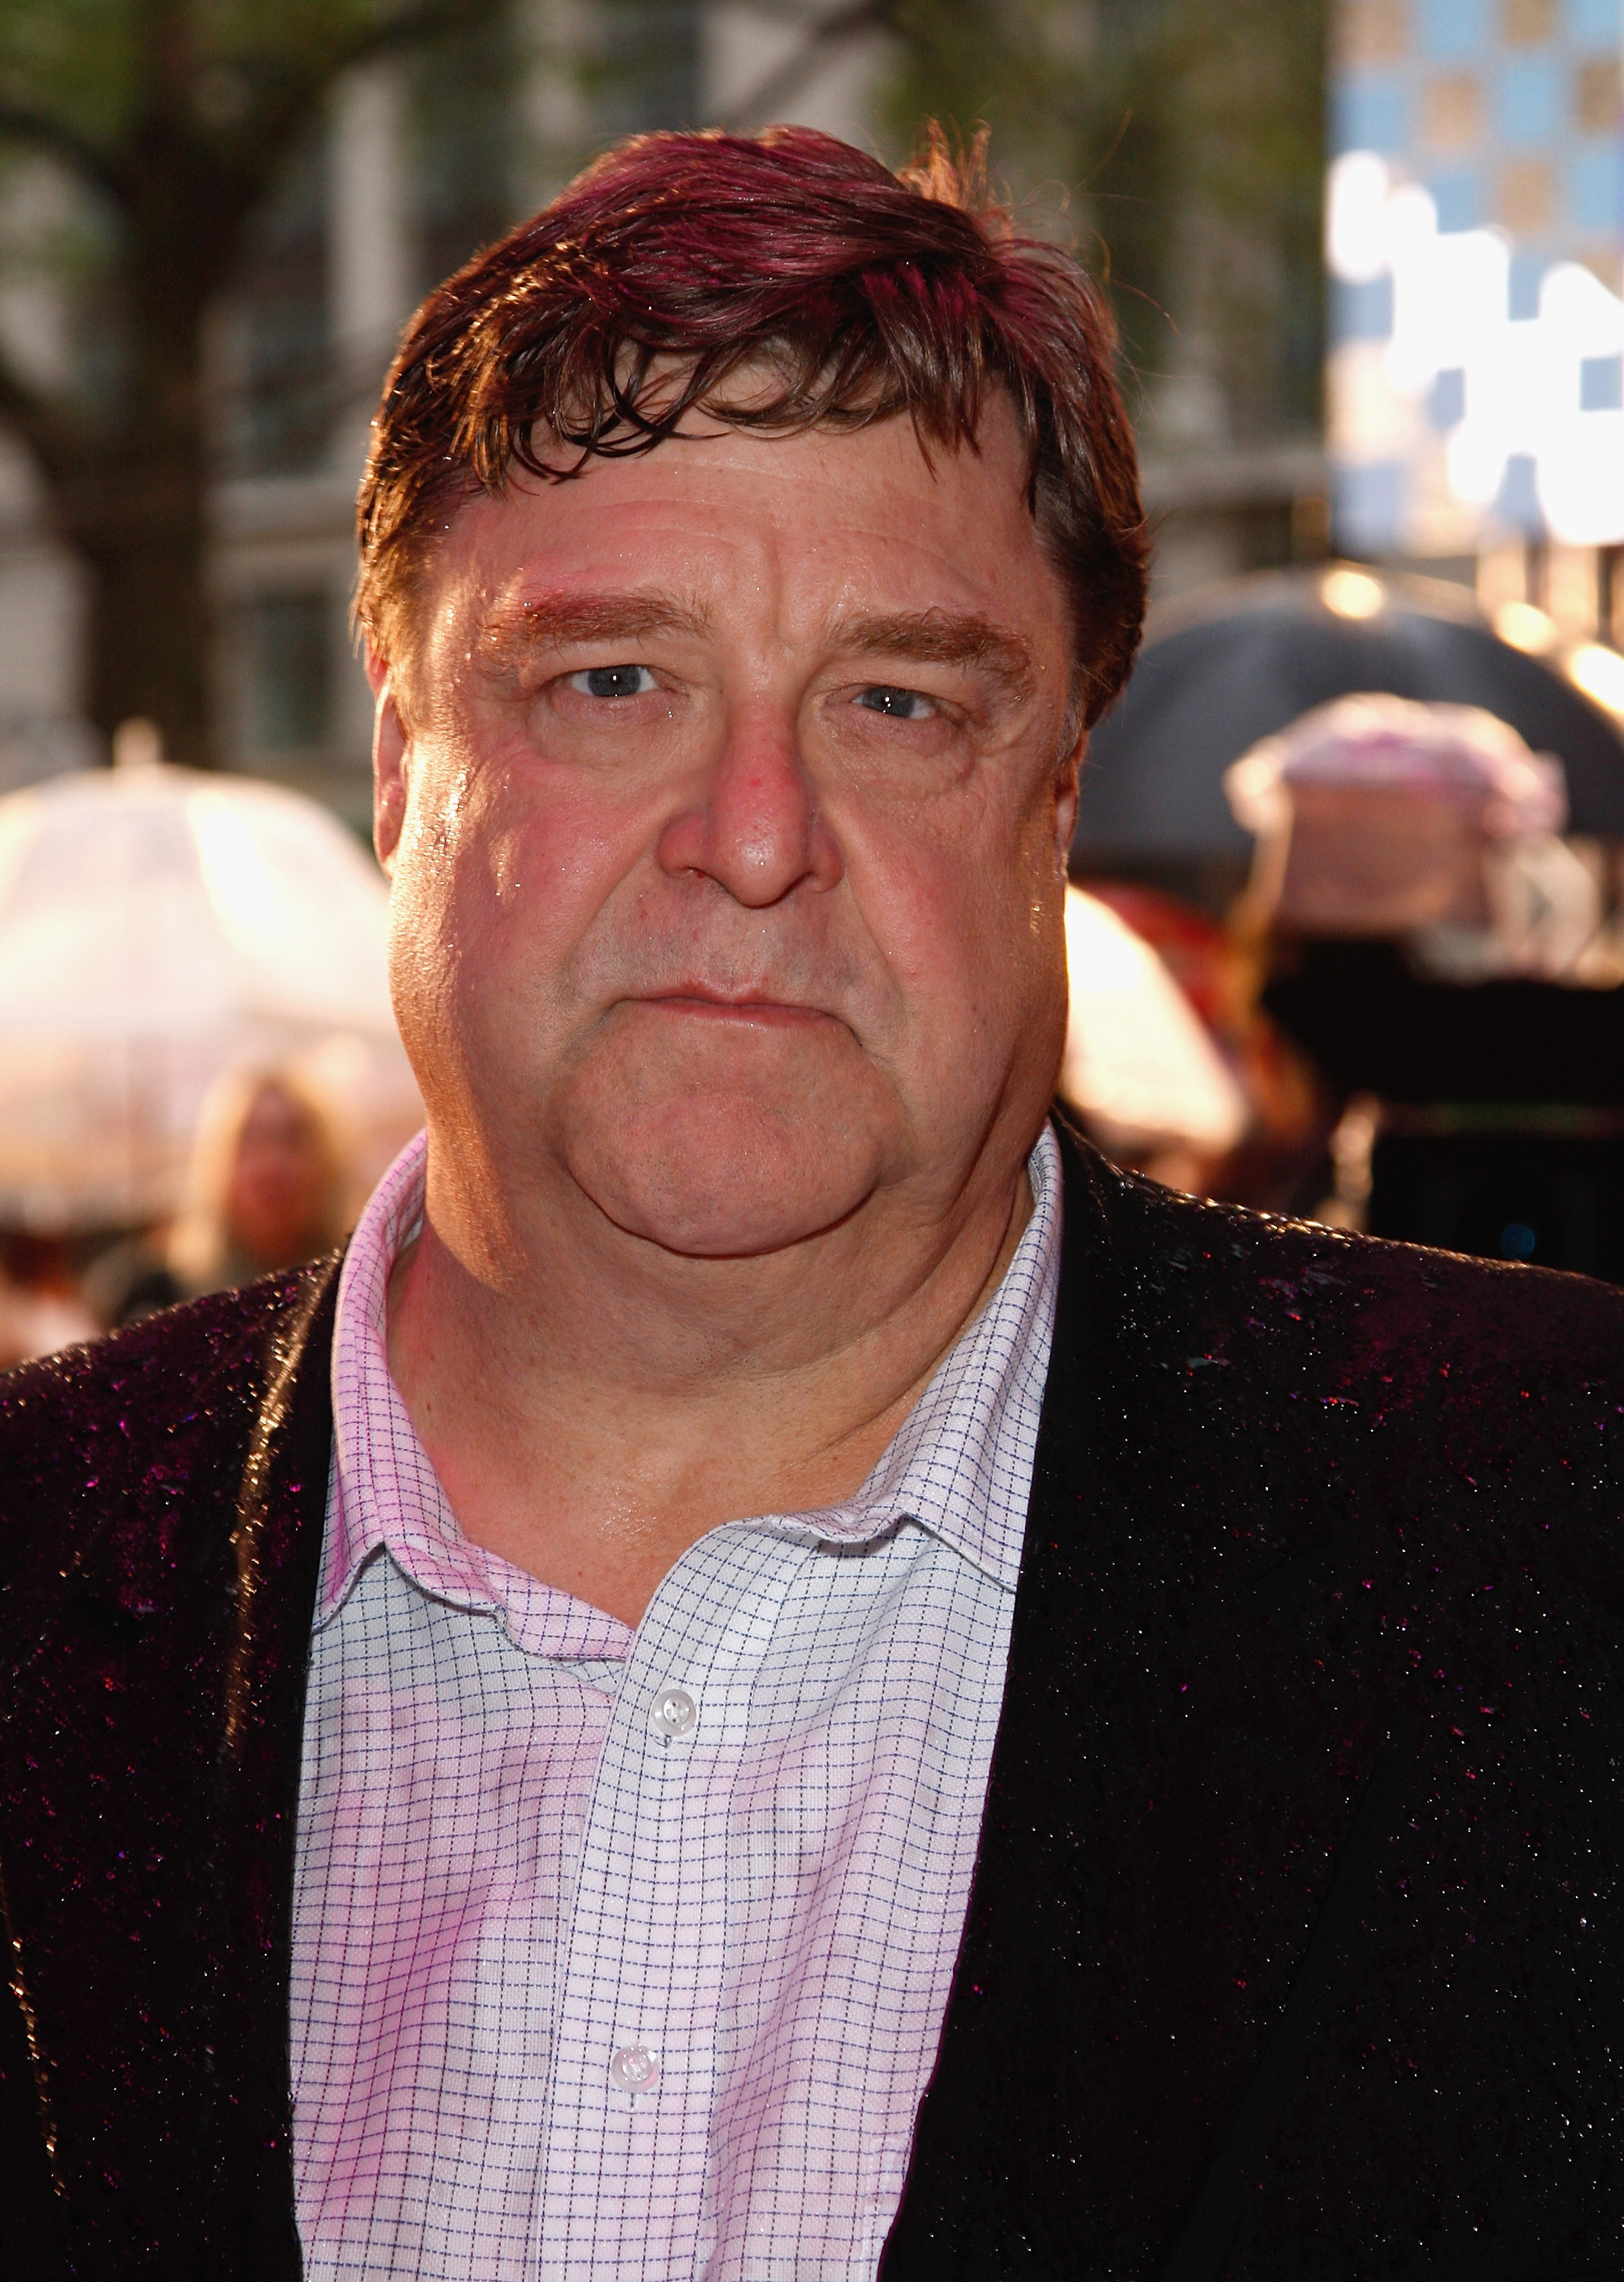 John Goodman at the Speed Racer film premiere held at the Empire Leicester Square on April 29, 2008 in London, England | Source: Getty Images